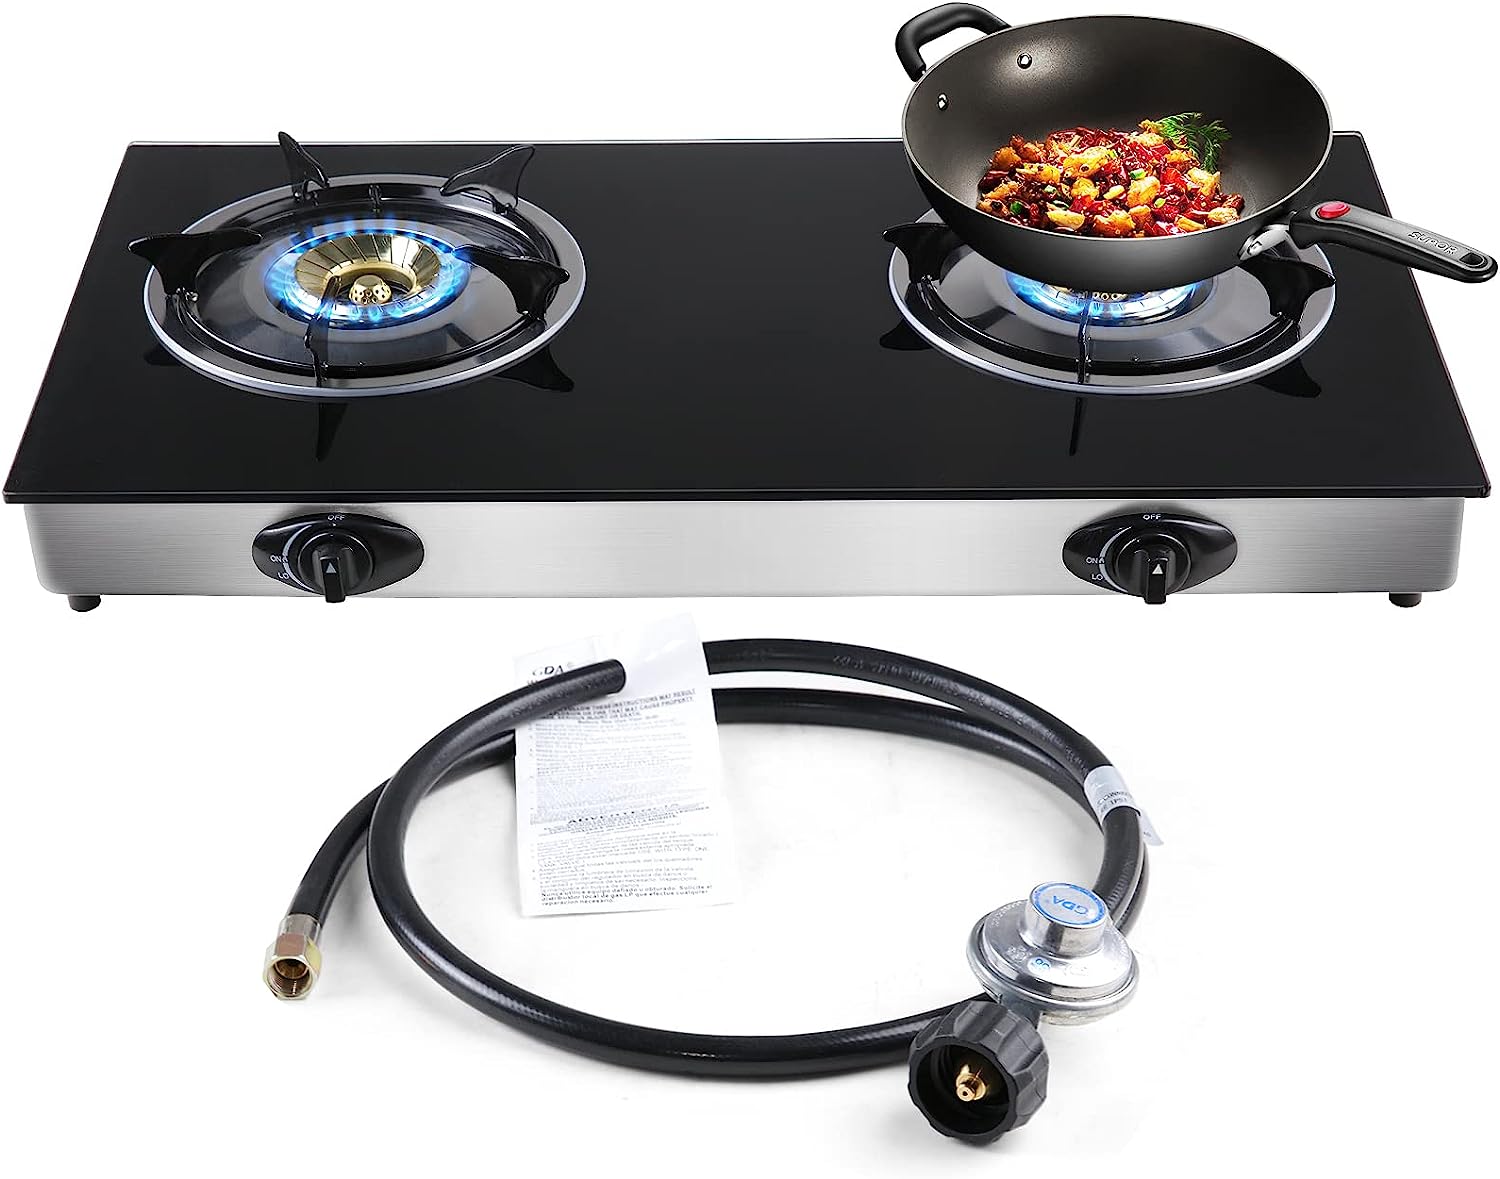  RV Stove Propane, Camplux Stainless Steel RV Cooktop